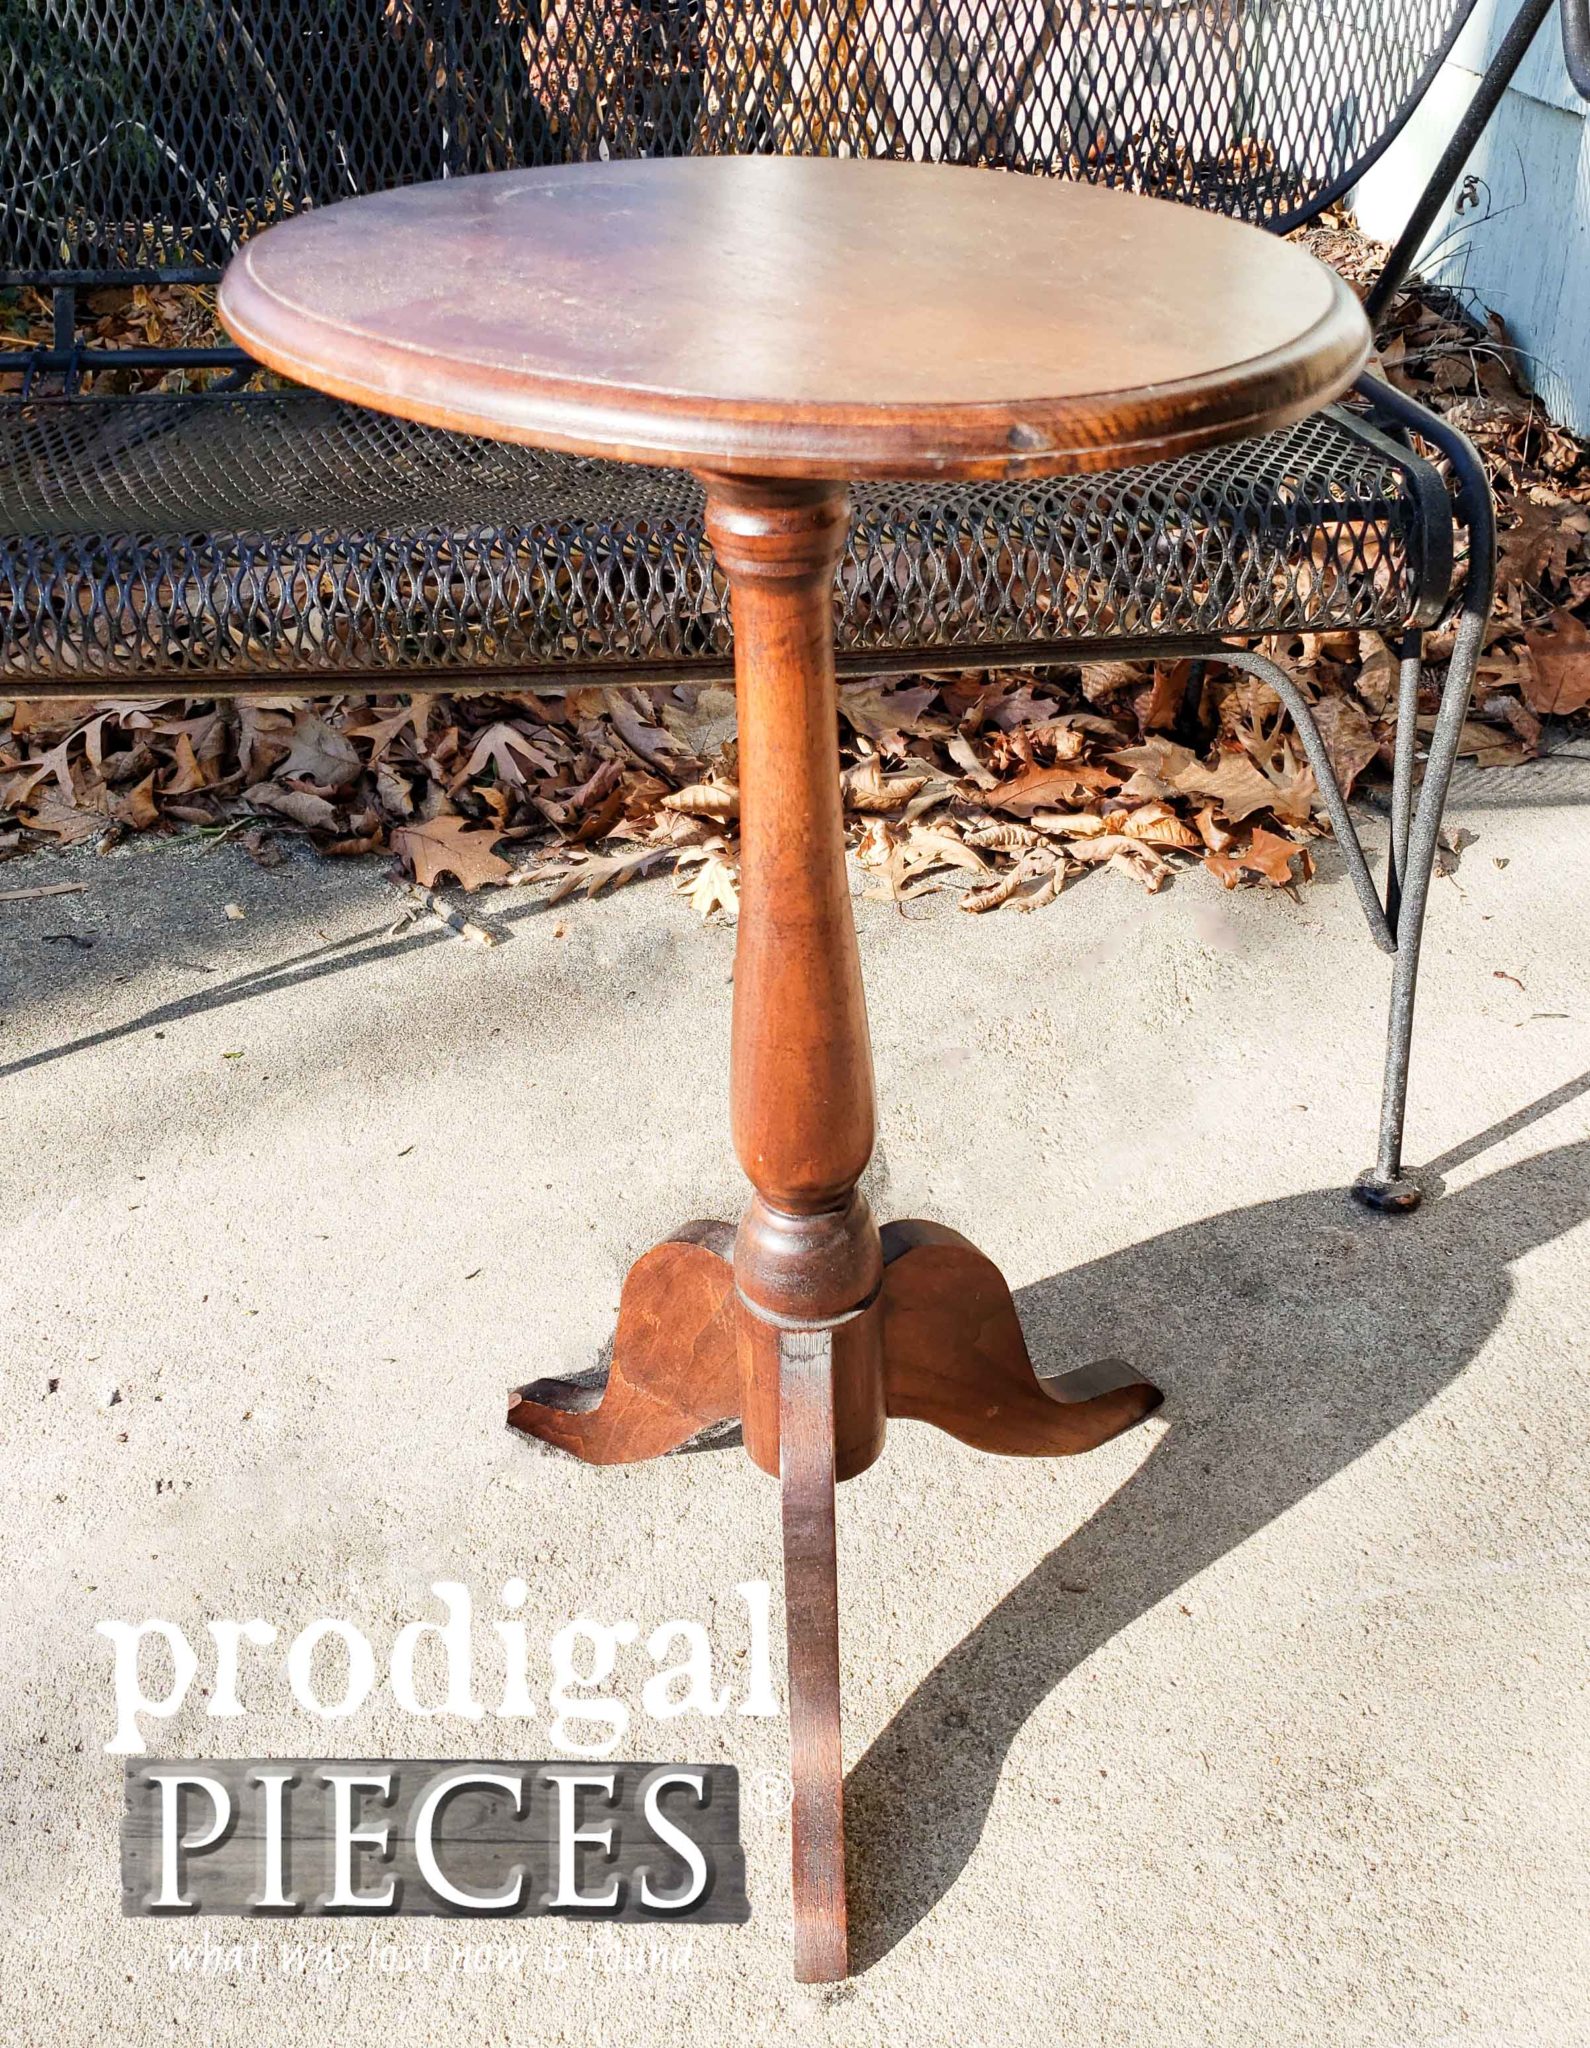 Vintage Accent Table Before Makeover by Larissa of Prodigal Pieces | prodigalpieces.com